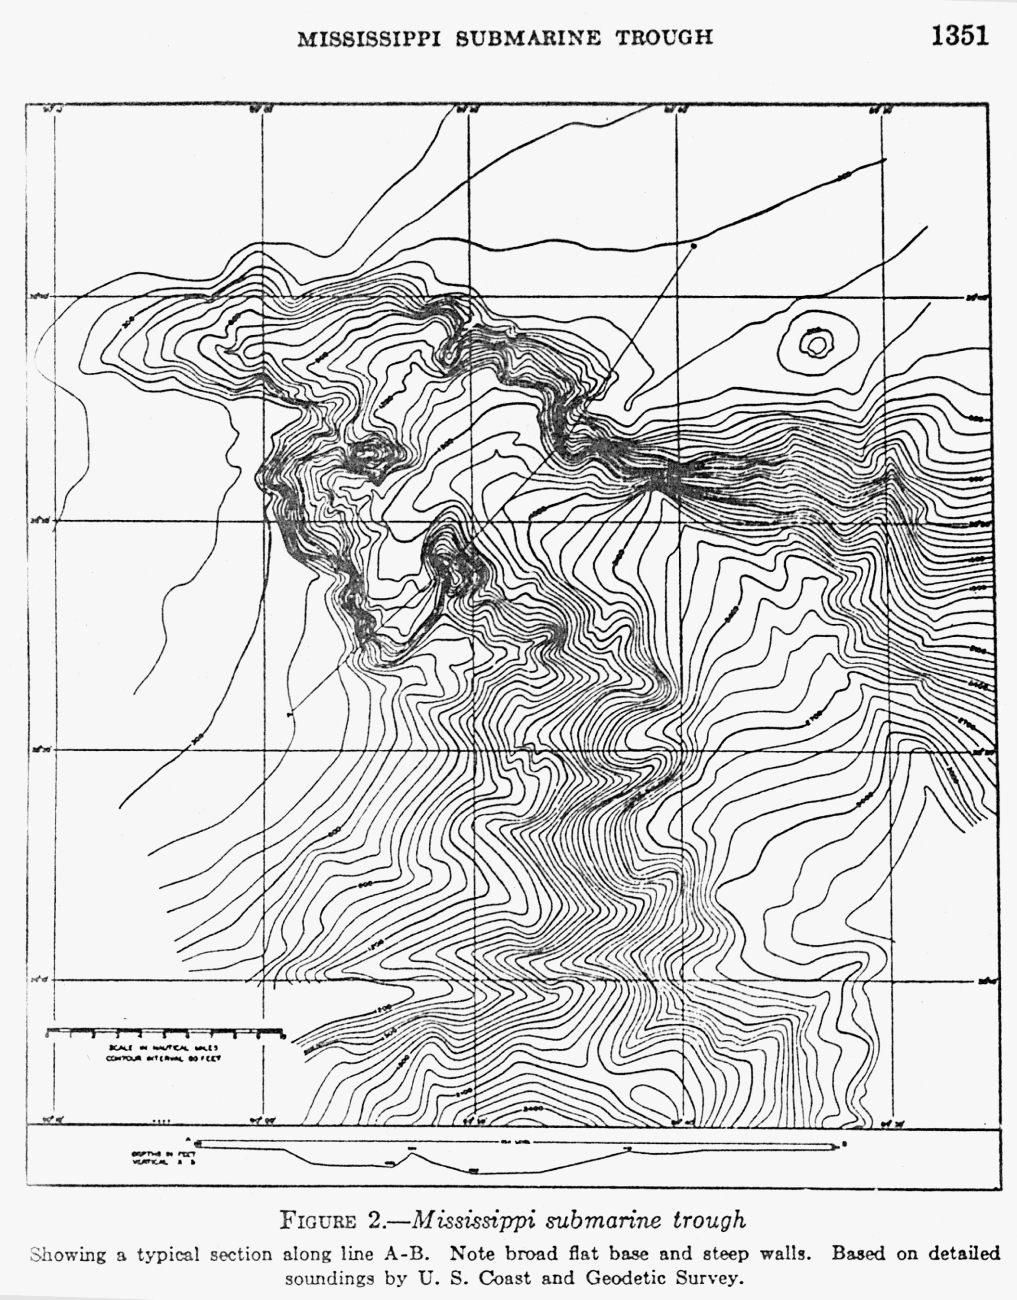 Mississippi Canyon discovered by Coast and Geodetic Survey, described andinterpreted by Francis Shepard